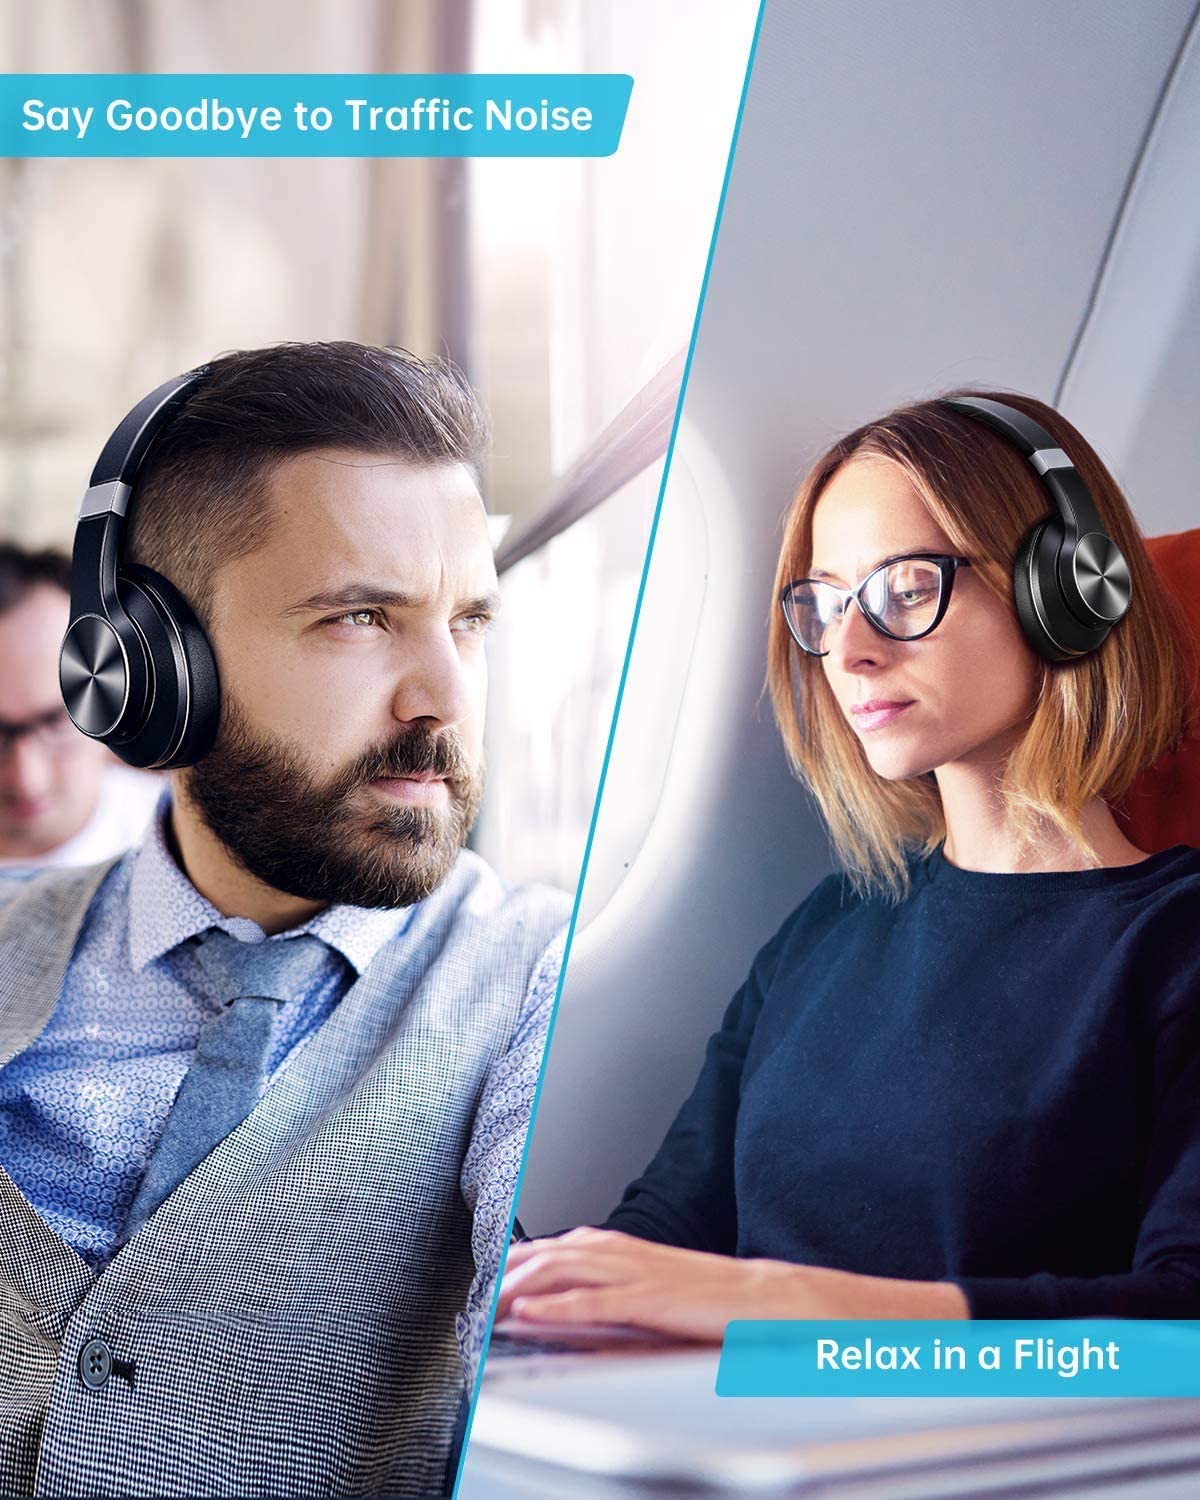 VANKYO C751 Wireless Headphones with CVC 8.0 Microphone, Deep Bass, High Fidelity Sound, Comfortable Protein Ear Cushions, 30 Hours of Play Time, Suitable for Travel/Work - image 4 of 8